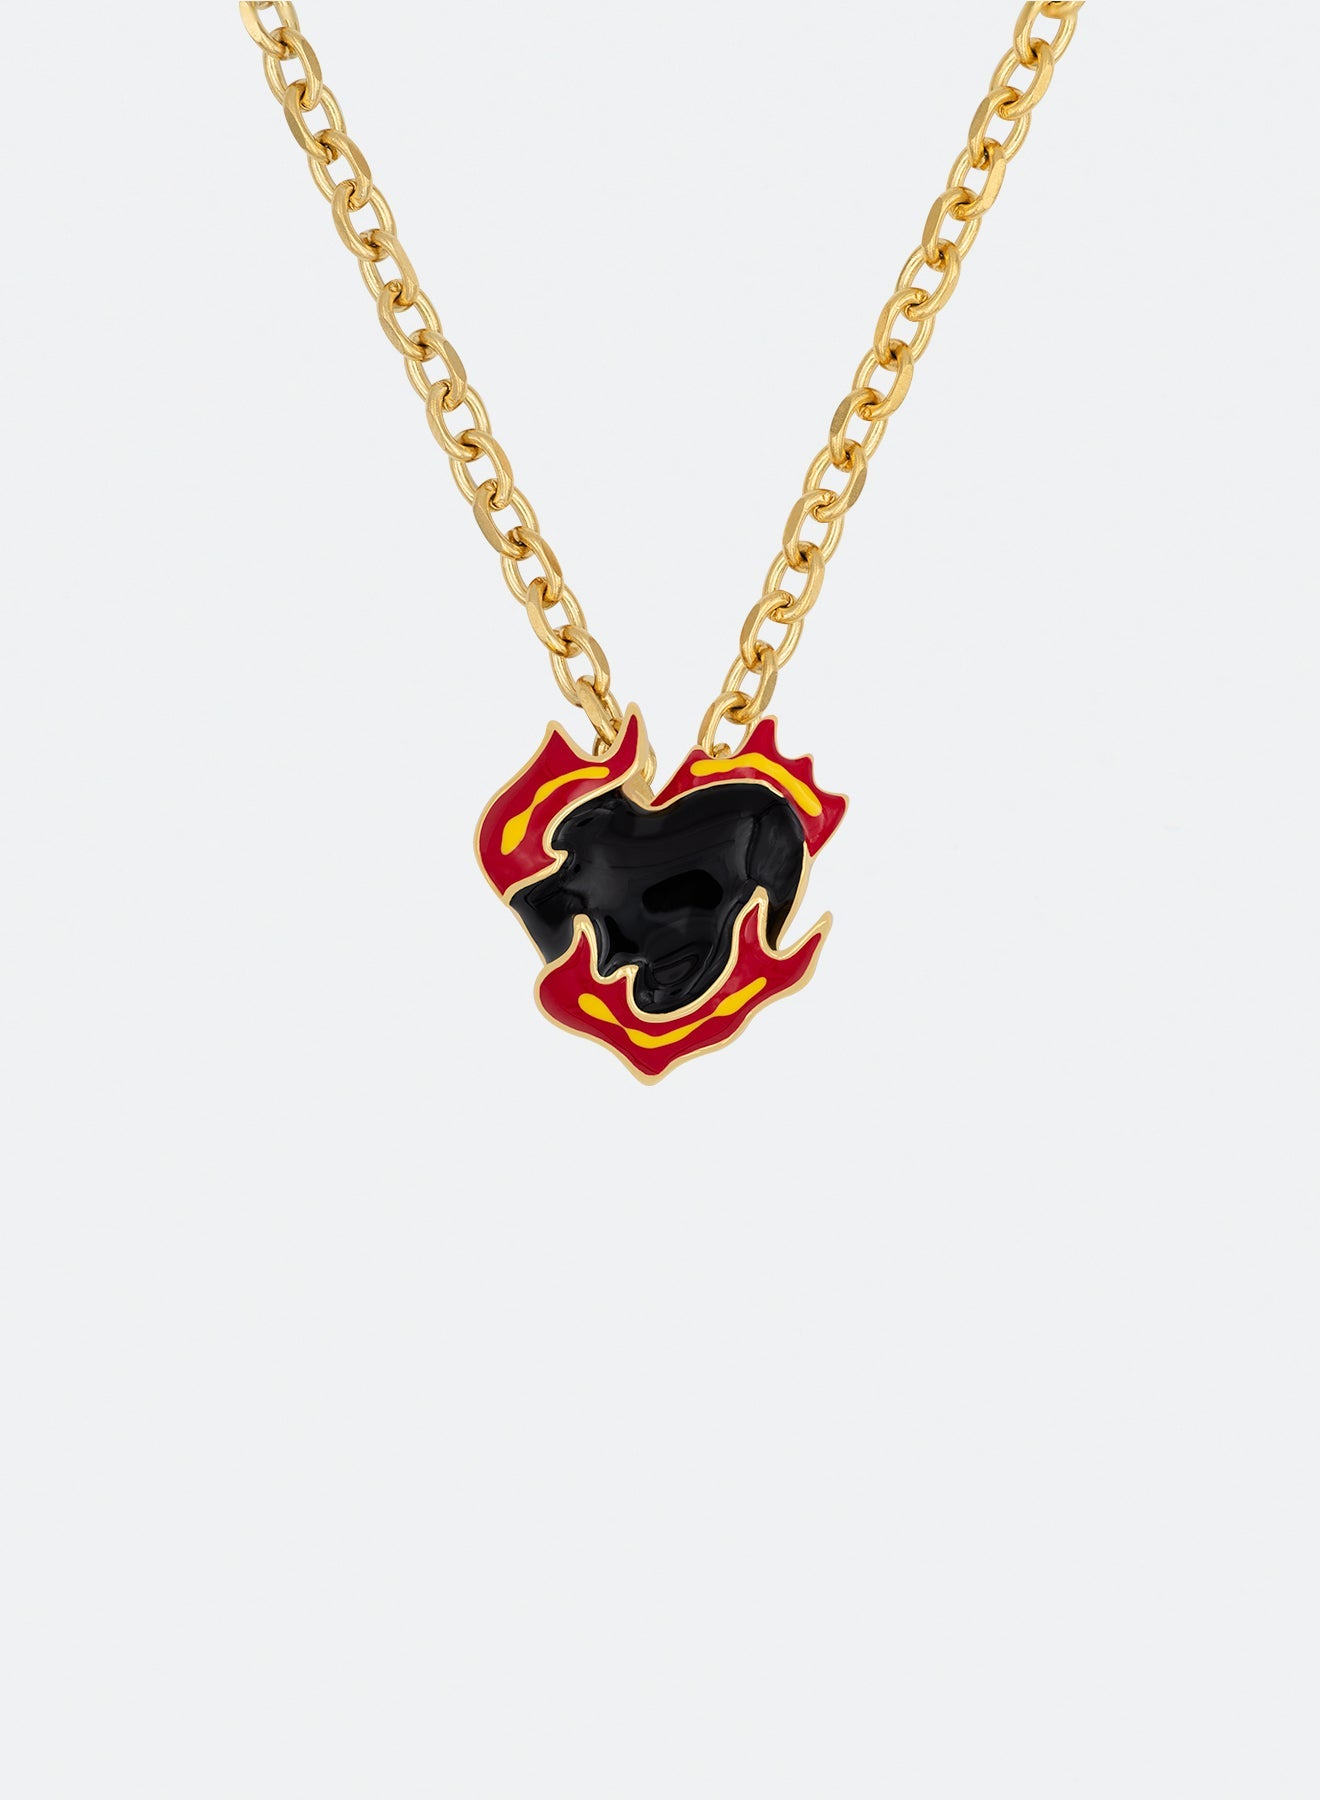 18k yellow gold coated heart pendant necklace with black and red-yellow hand painted enamels